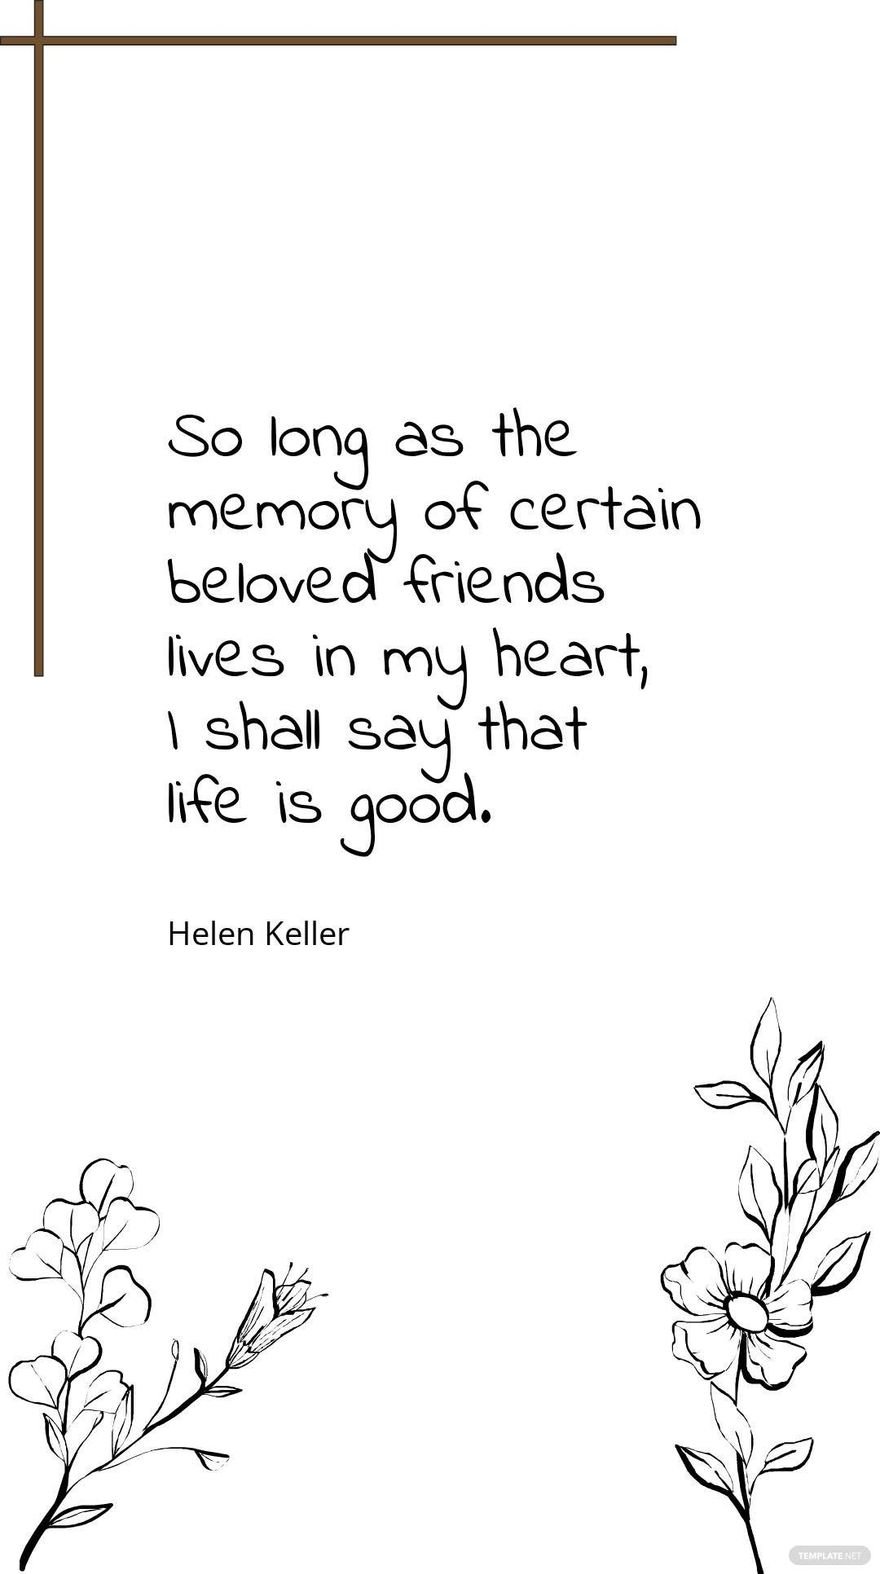 Helen Keller - So long as the memory of certain beloved friends lives in my heart, I shall say that life is good